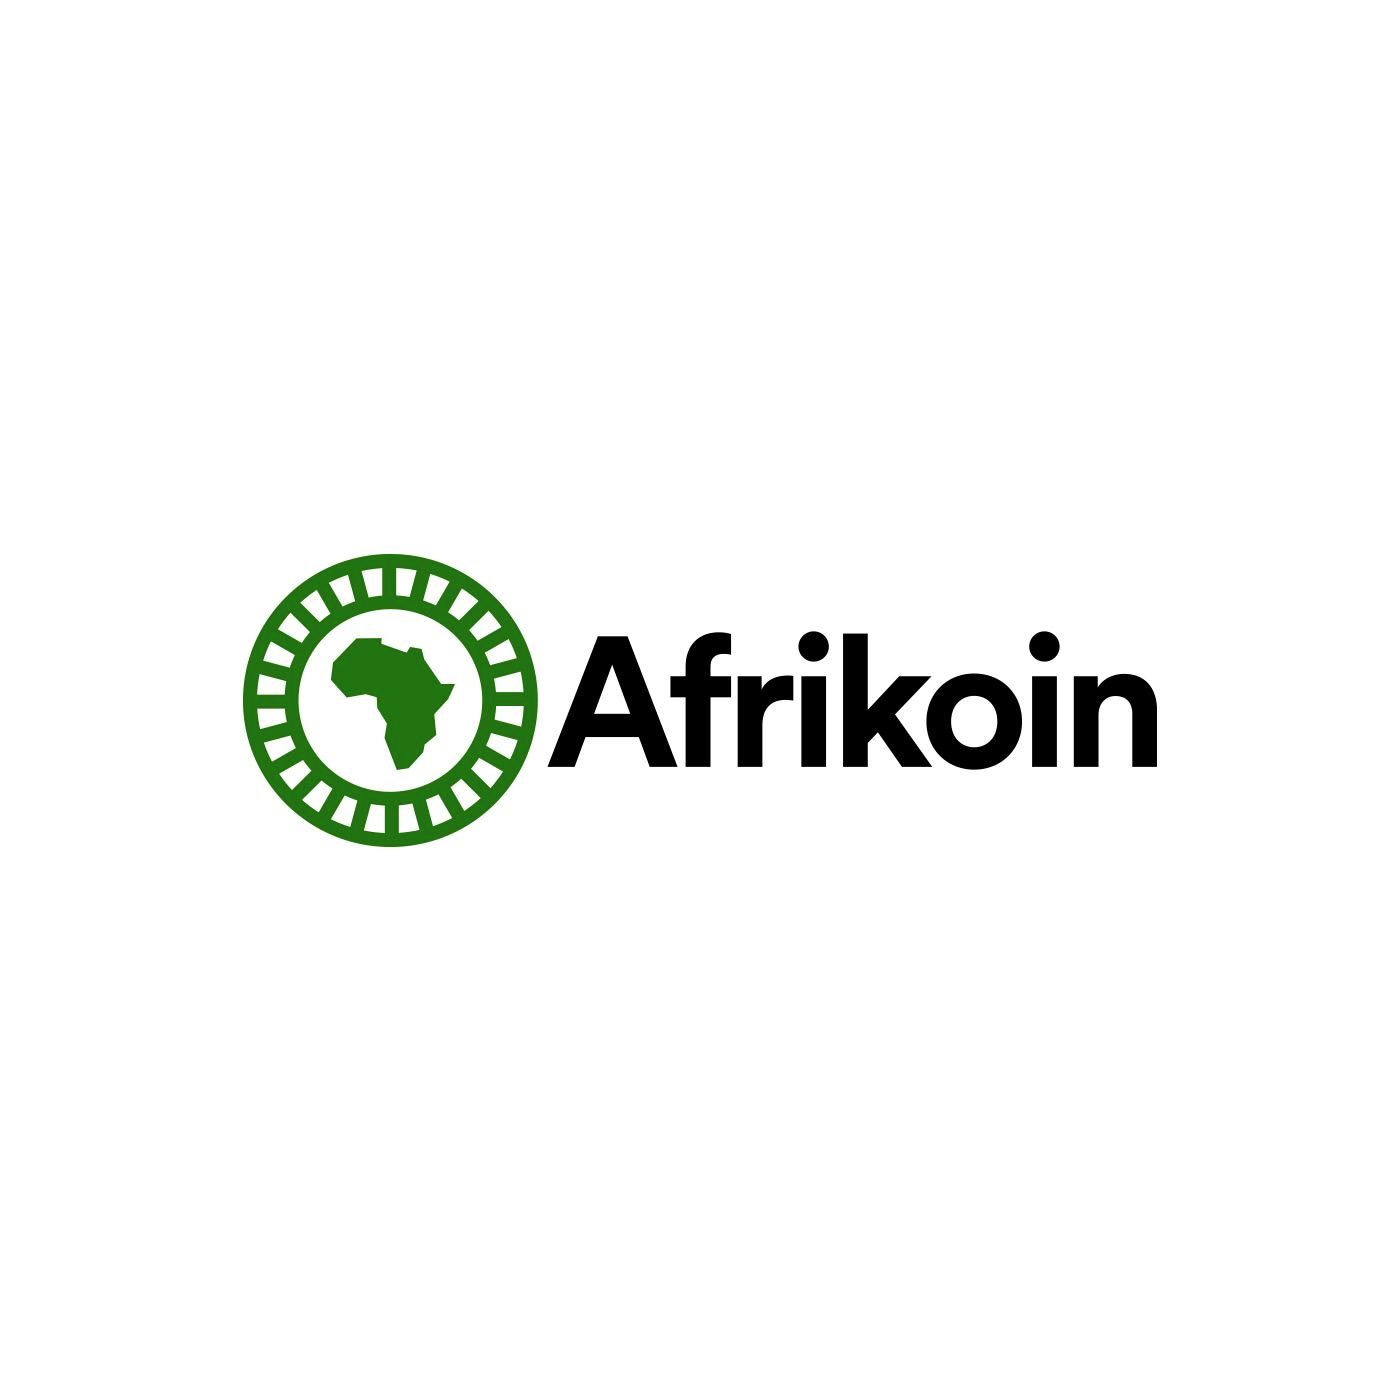 Afrikoin - Emerging Digital Currency & Payments in Africa